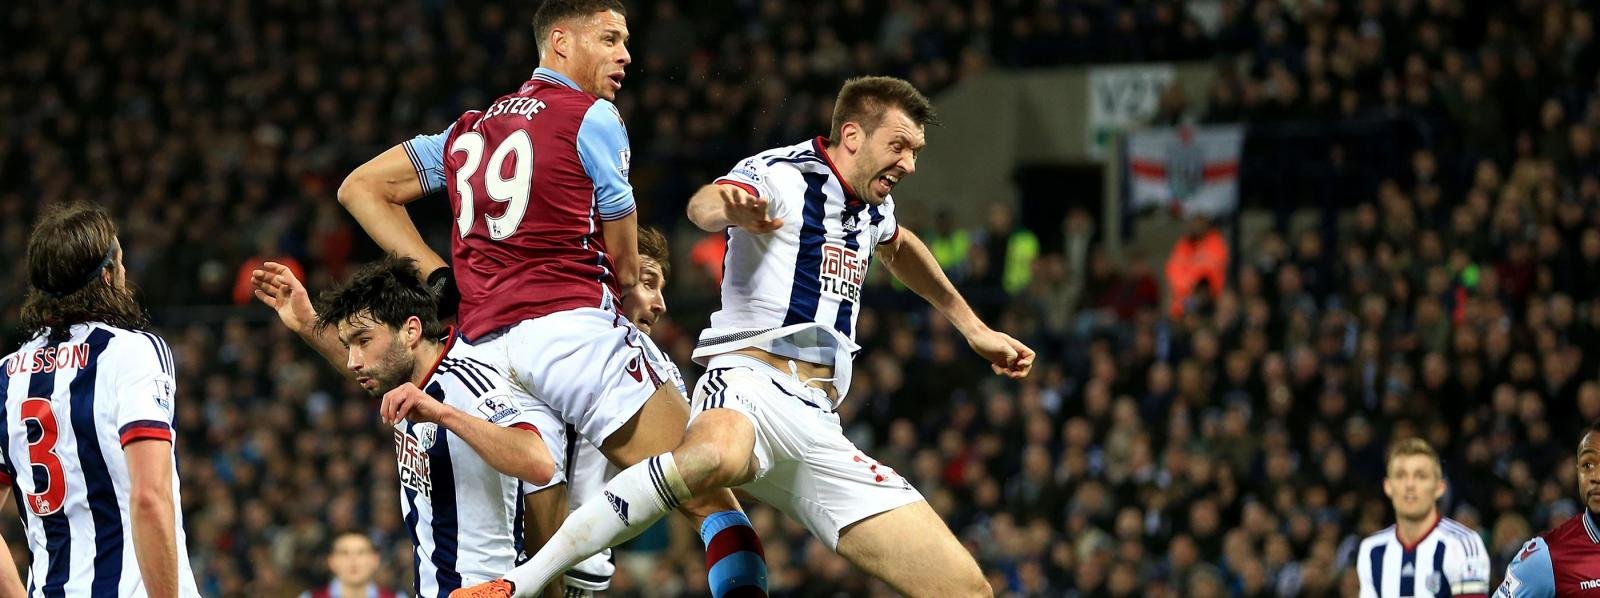 Relegation a real possibility for the Baggies